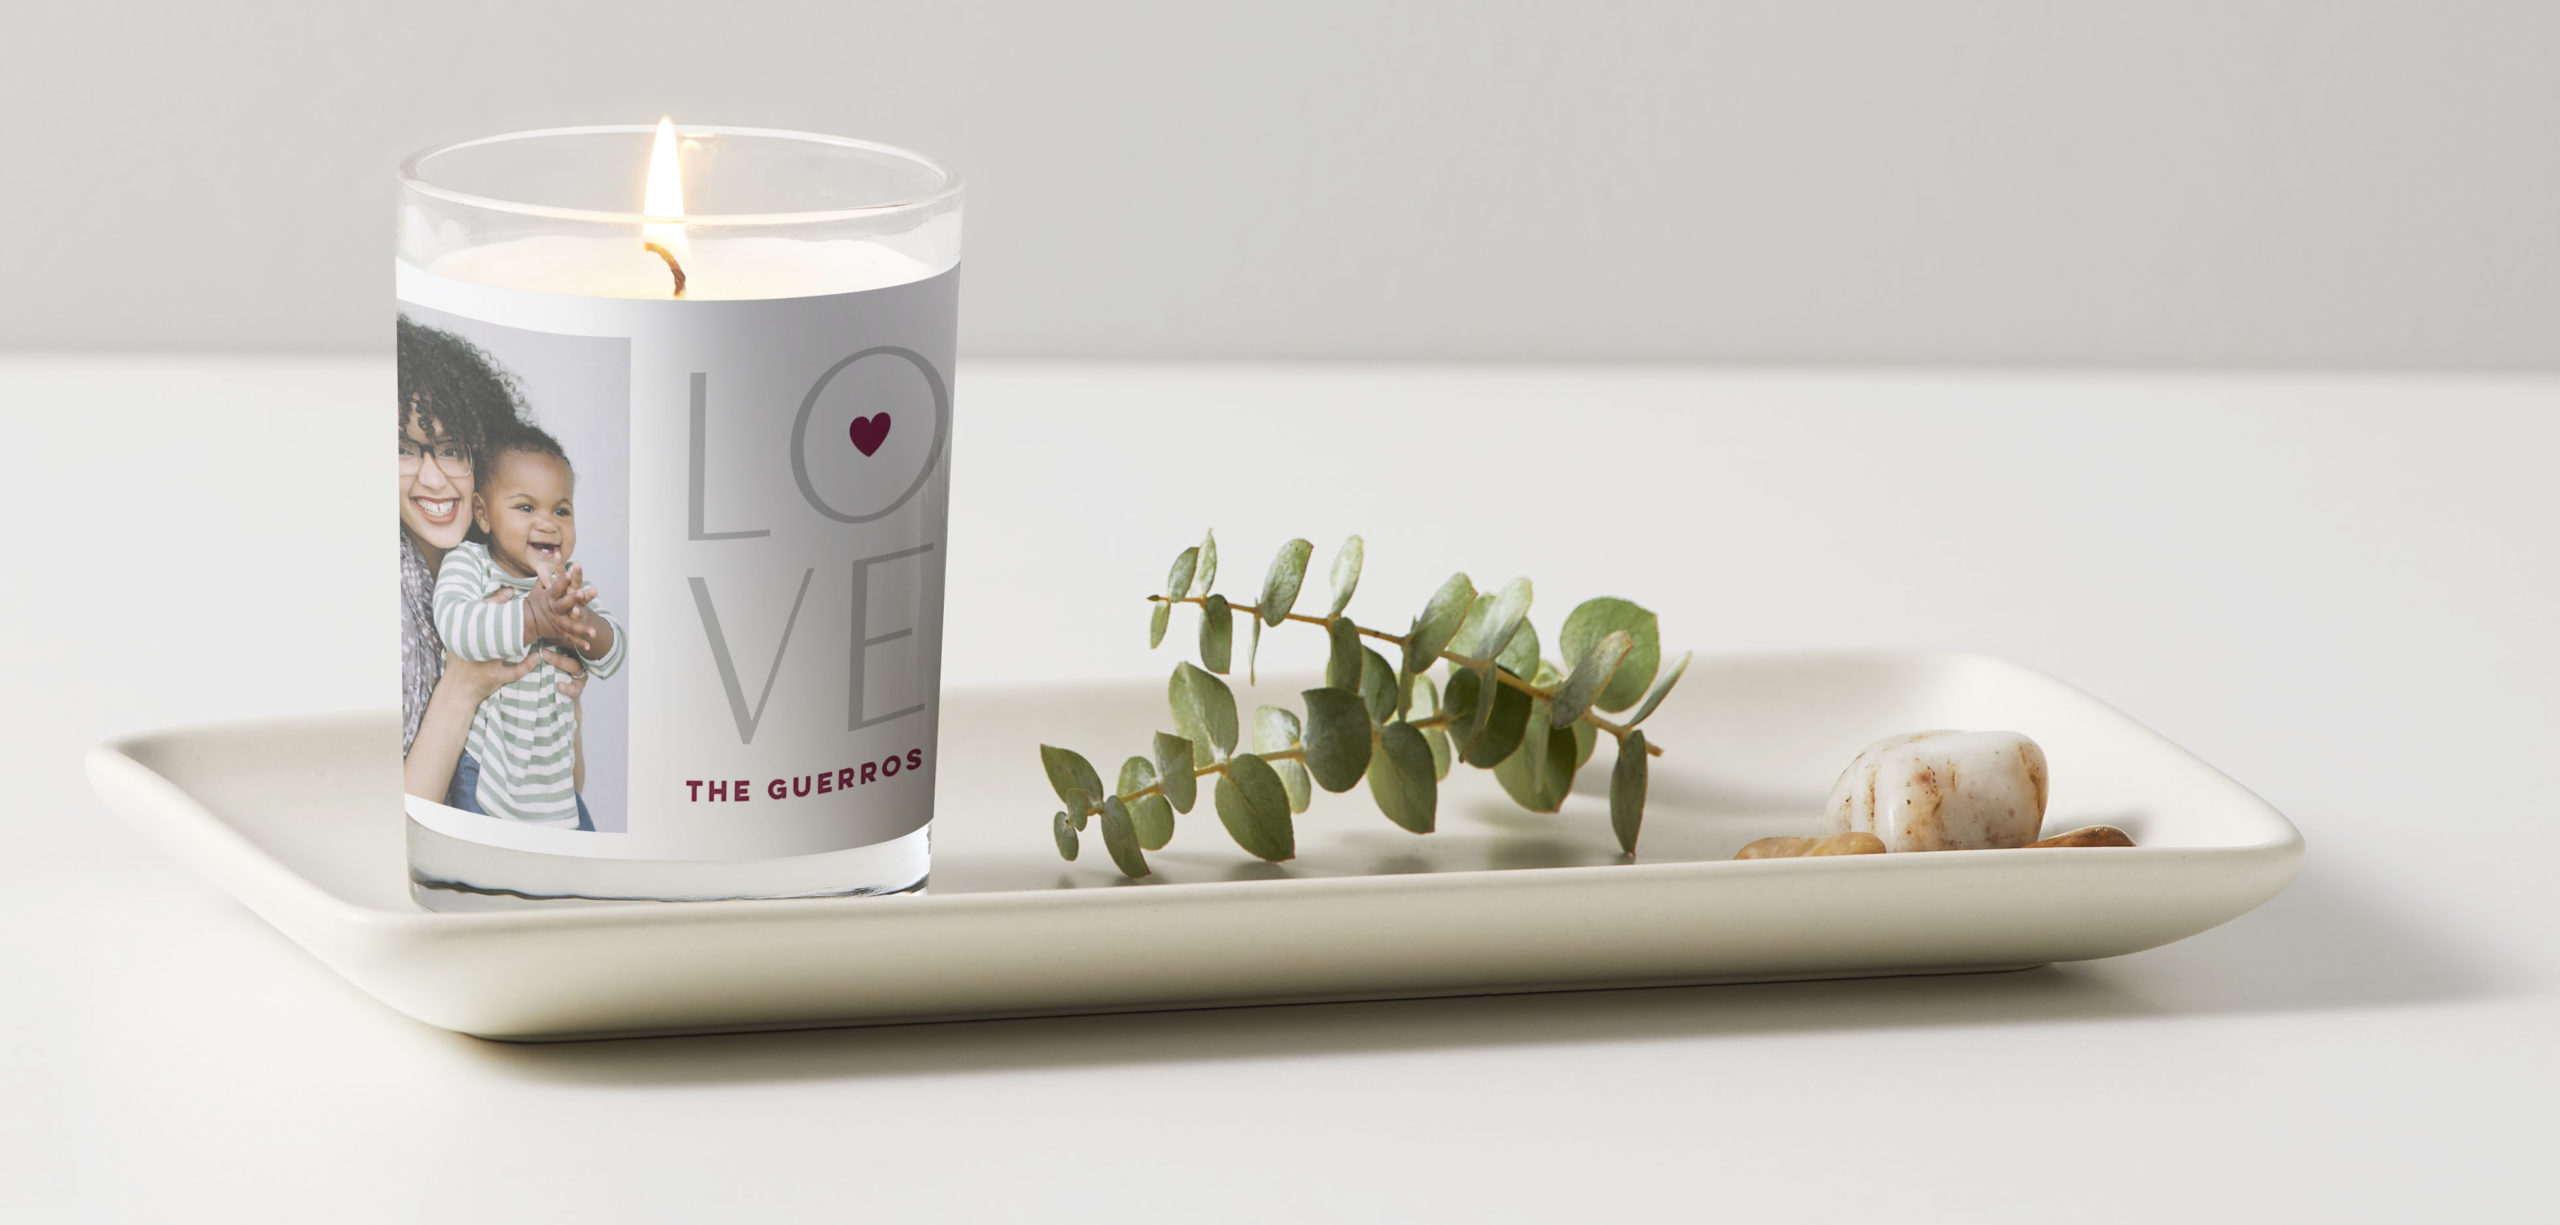 Custom candle with the word love written on it placed on a cream tray featuring a mother and her child